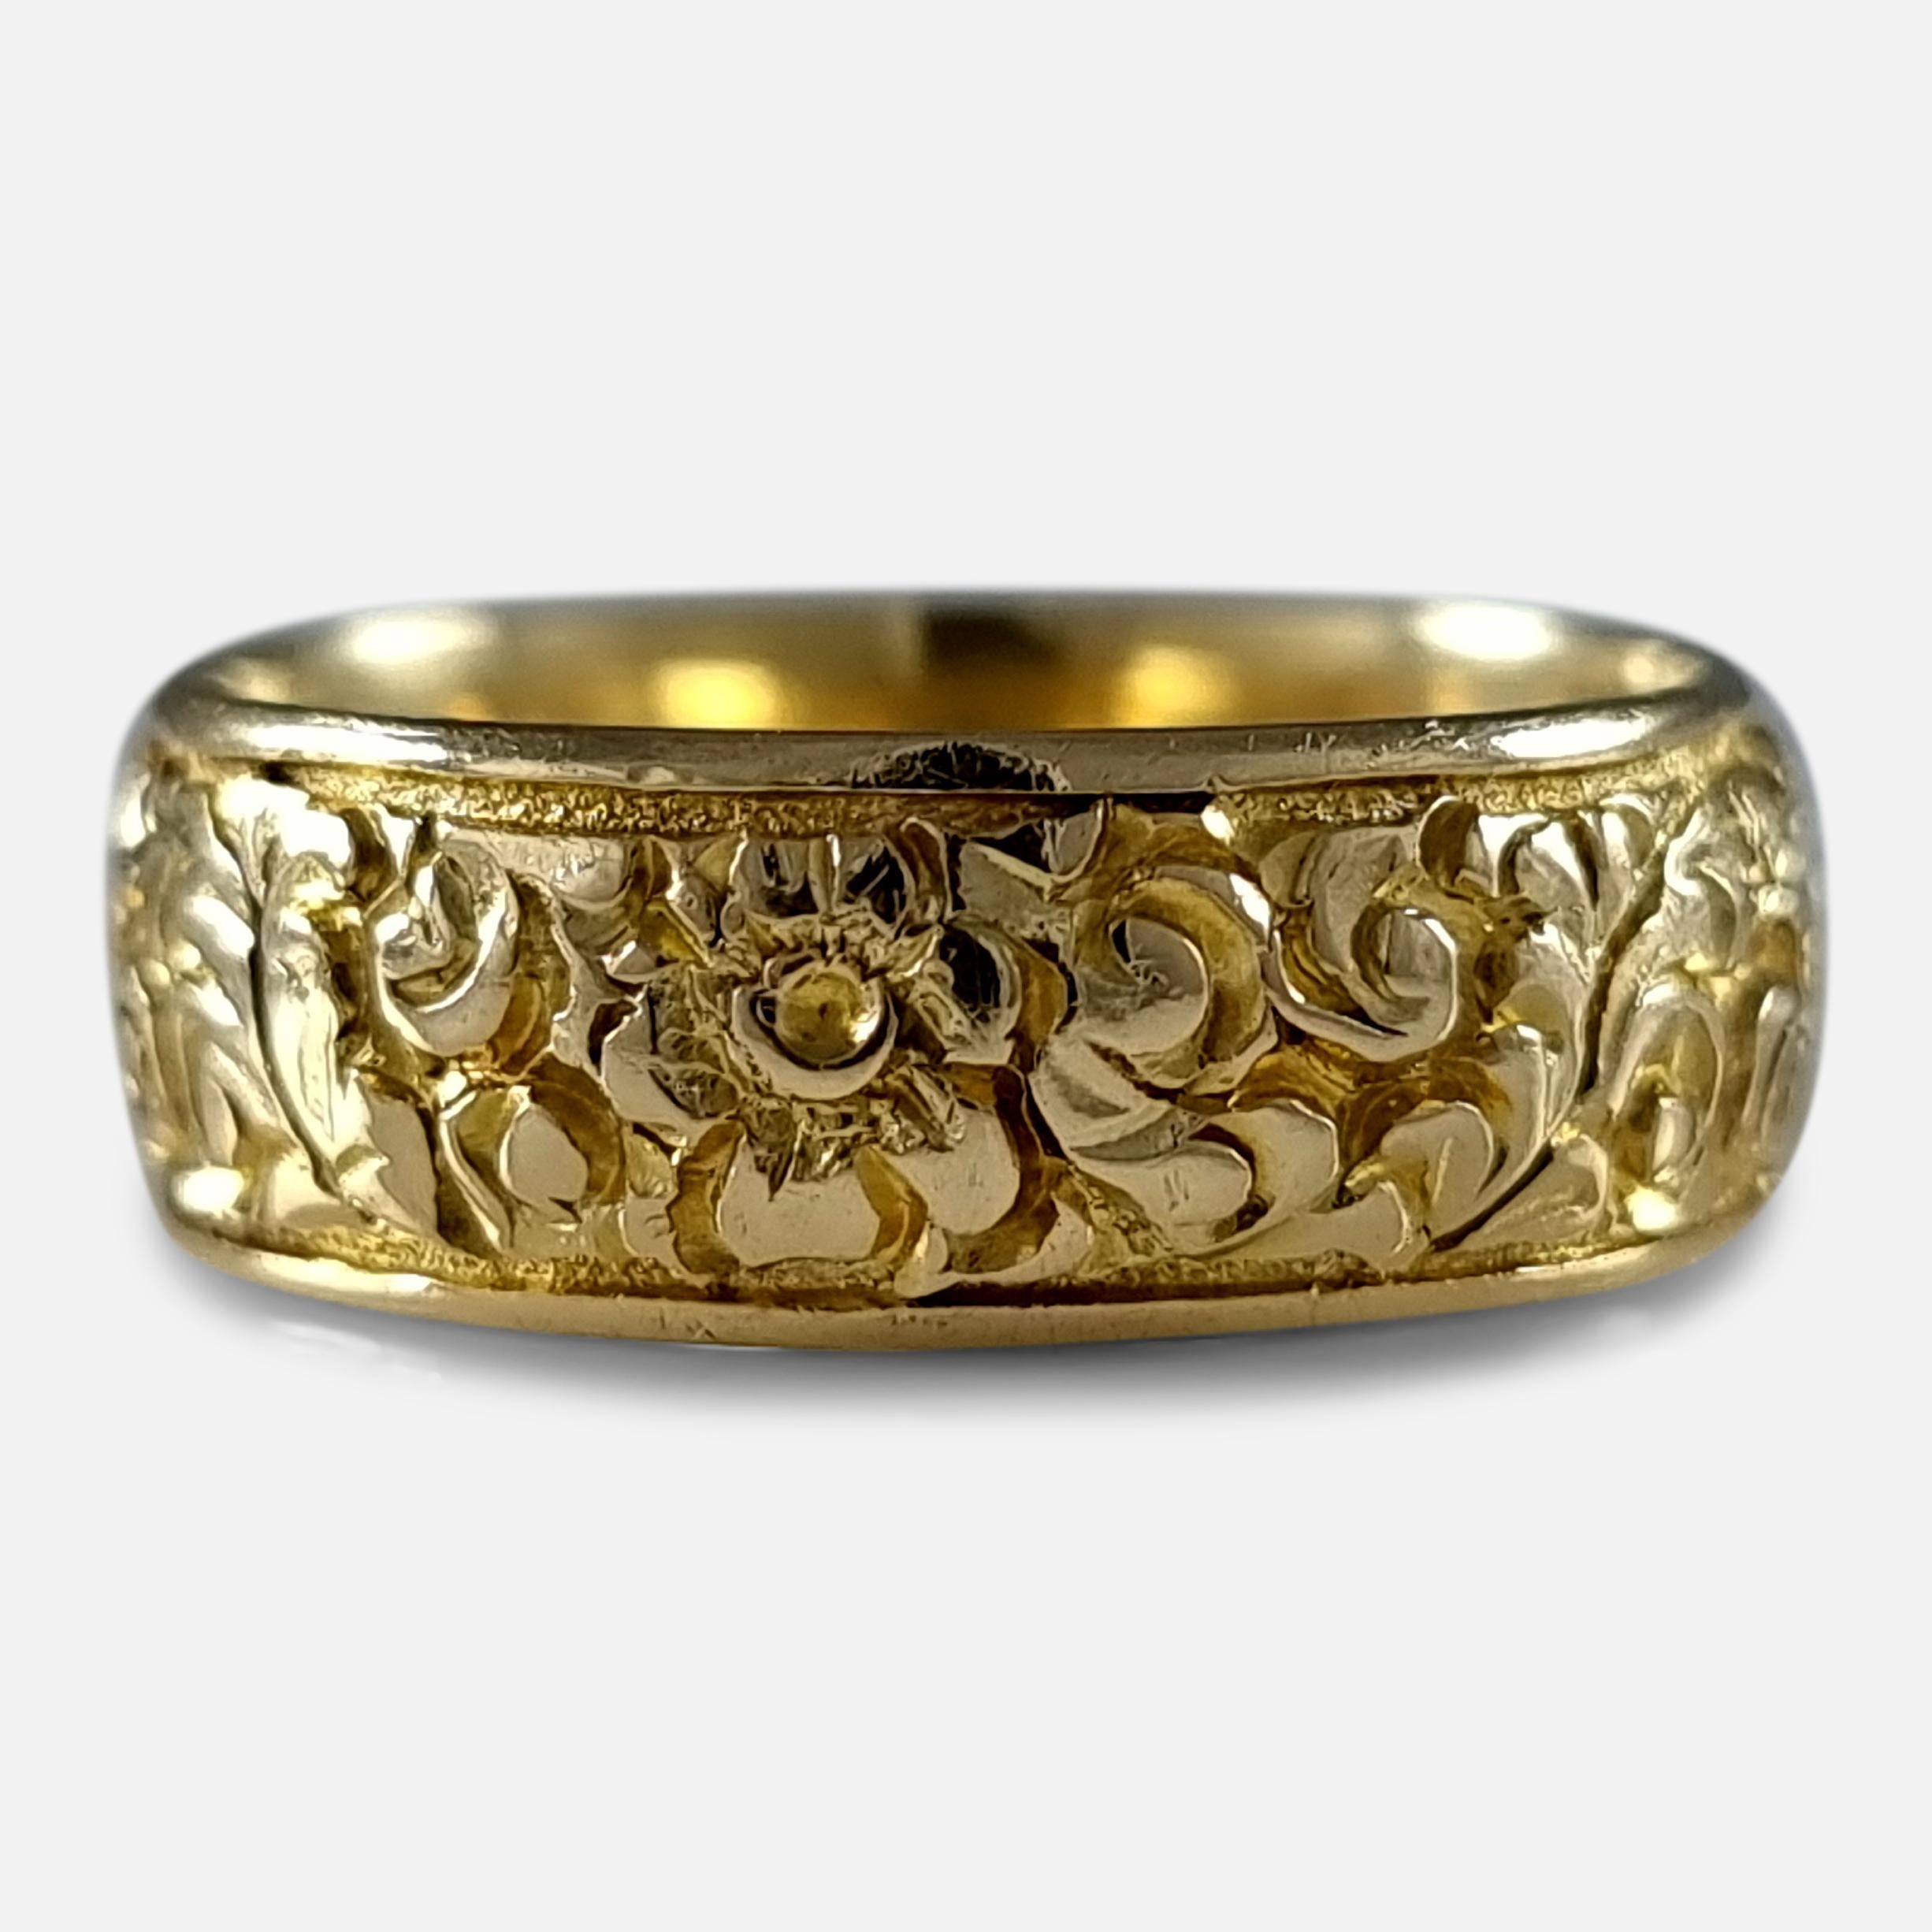 A George V 18ct yellow gold engraved Keeper ring. The ring is engraved with an embossed foliate decoration.

The ring is hallmarked with Chester marks, '18' for 18 carat gold, and date letter 'a' to denote 1926.

Assay: - .750 Gold (18ct).

Period: